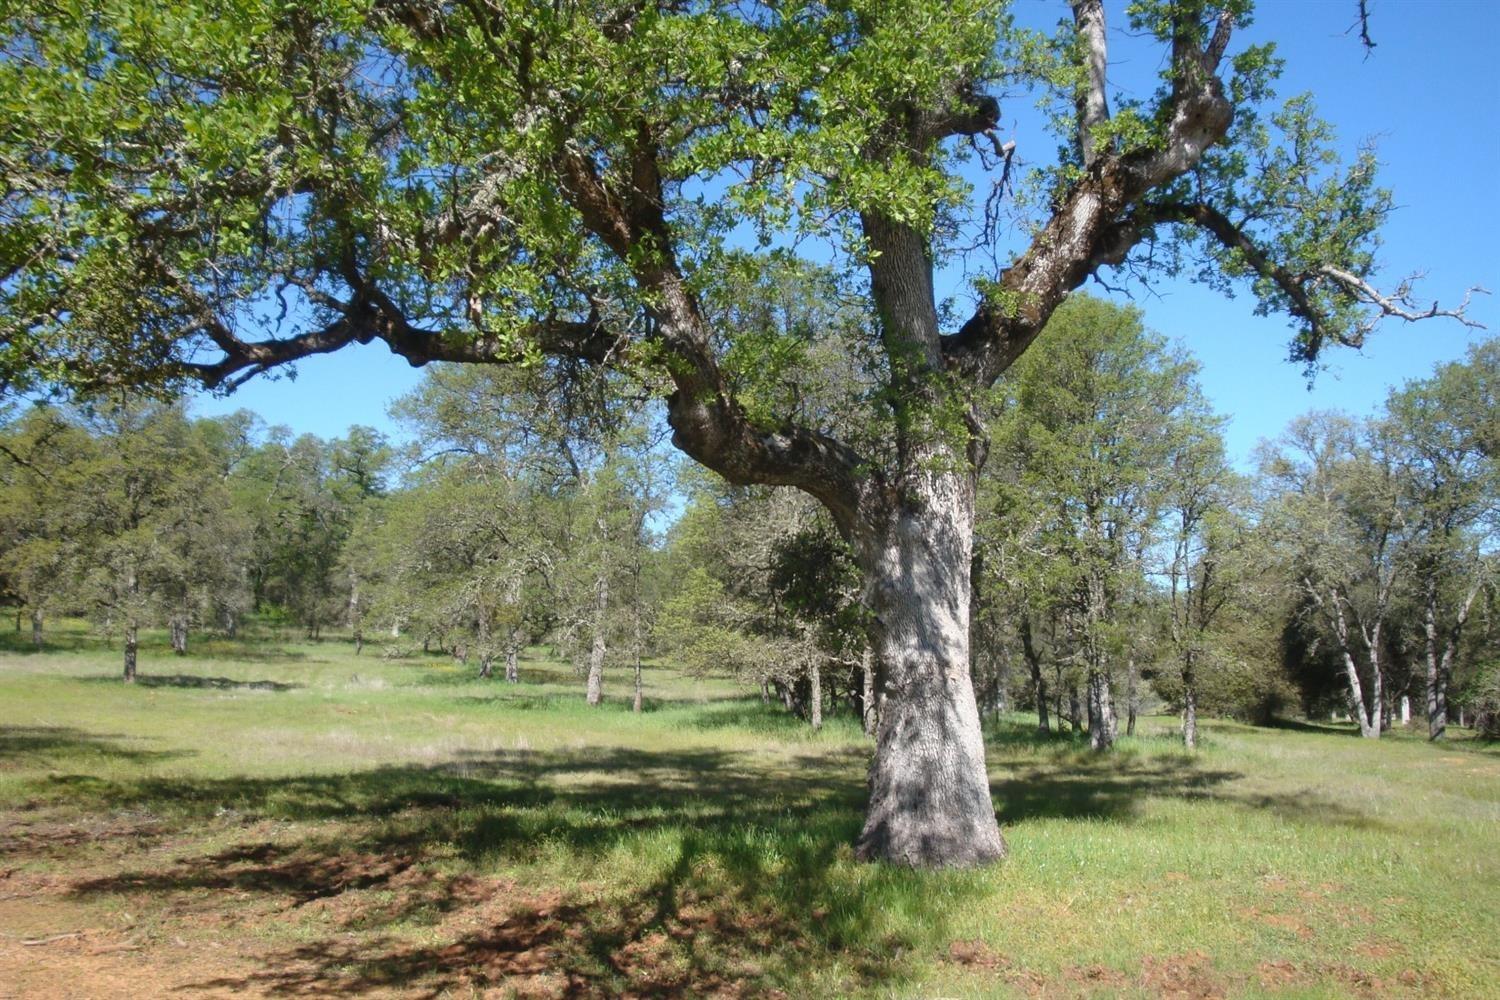 a view of a field with trees